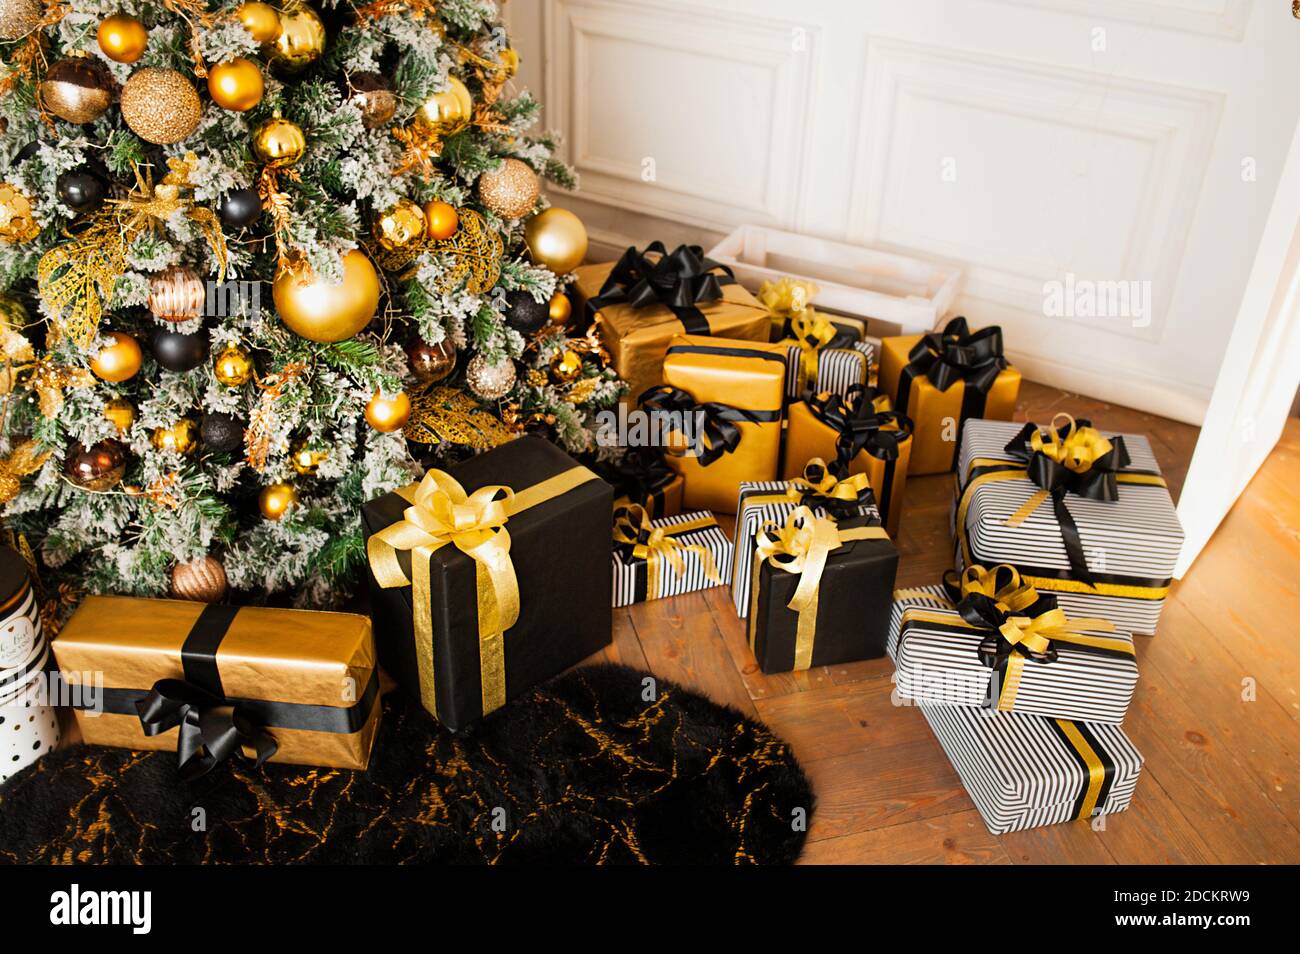 Another gift I wrapped for Christmas 2019, with the Black, Gold